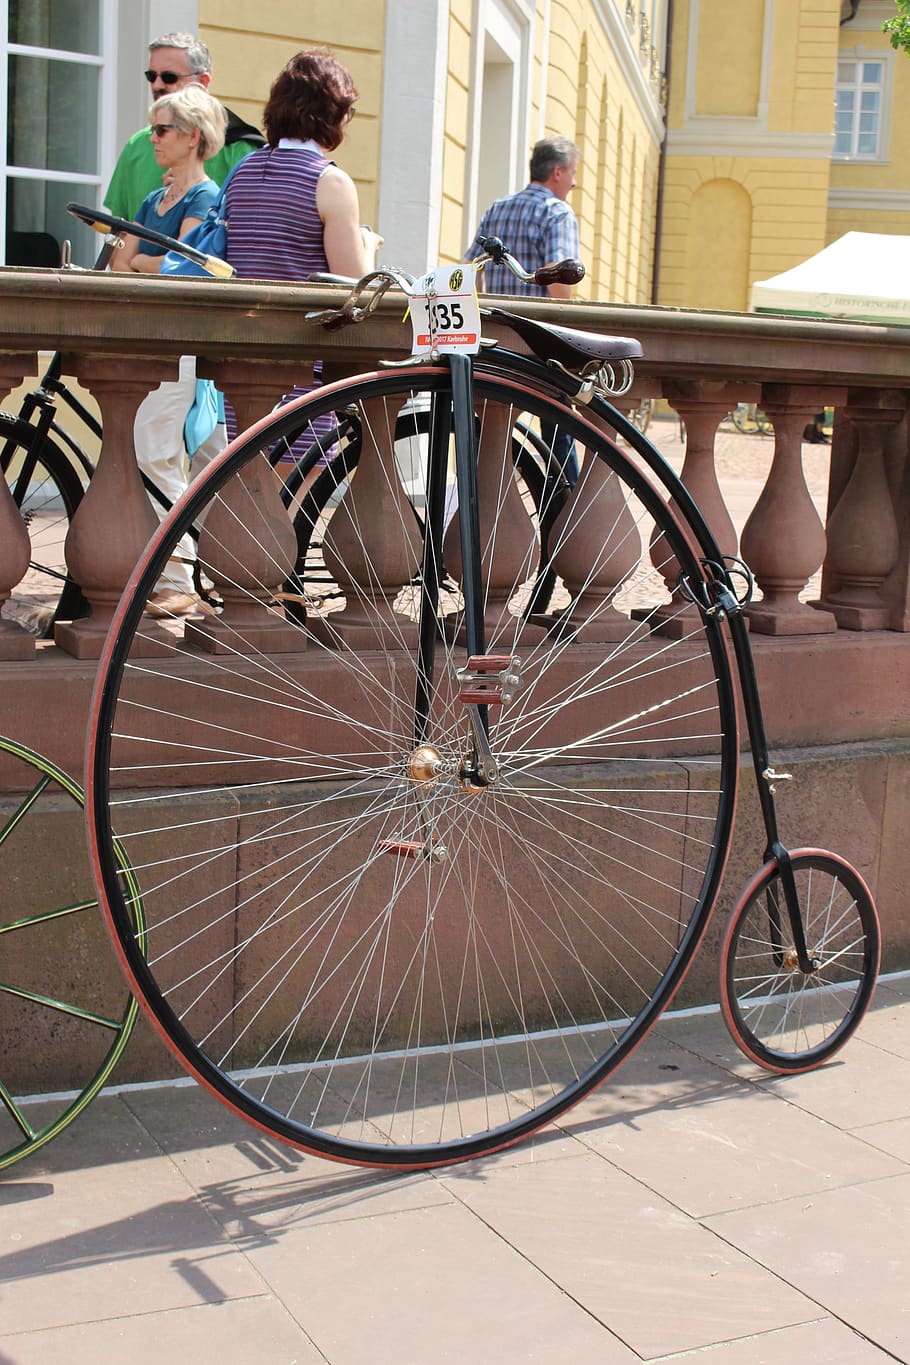 penny- farthing, bicycle, old, bicycles, cycle, wheel, bike, antique, architecture, transportation